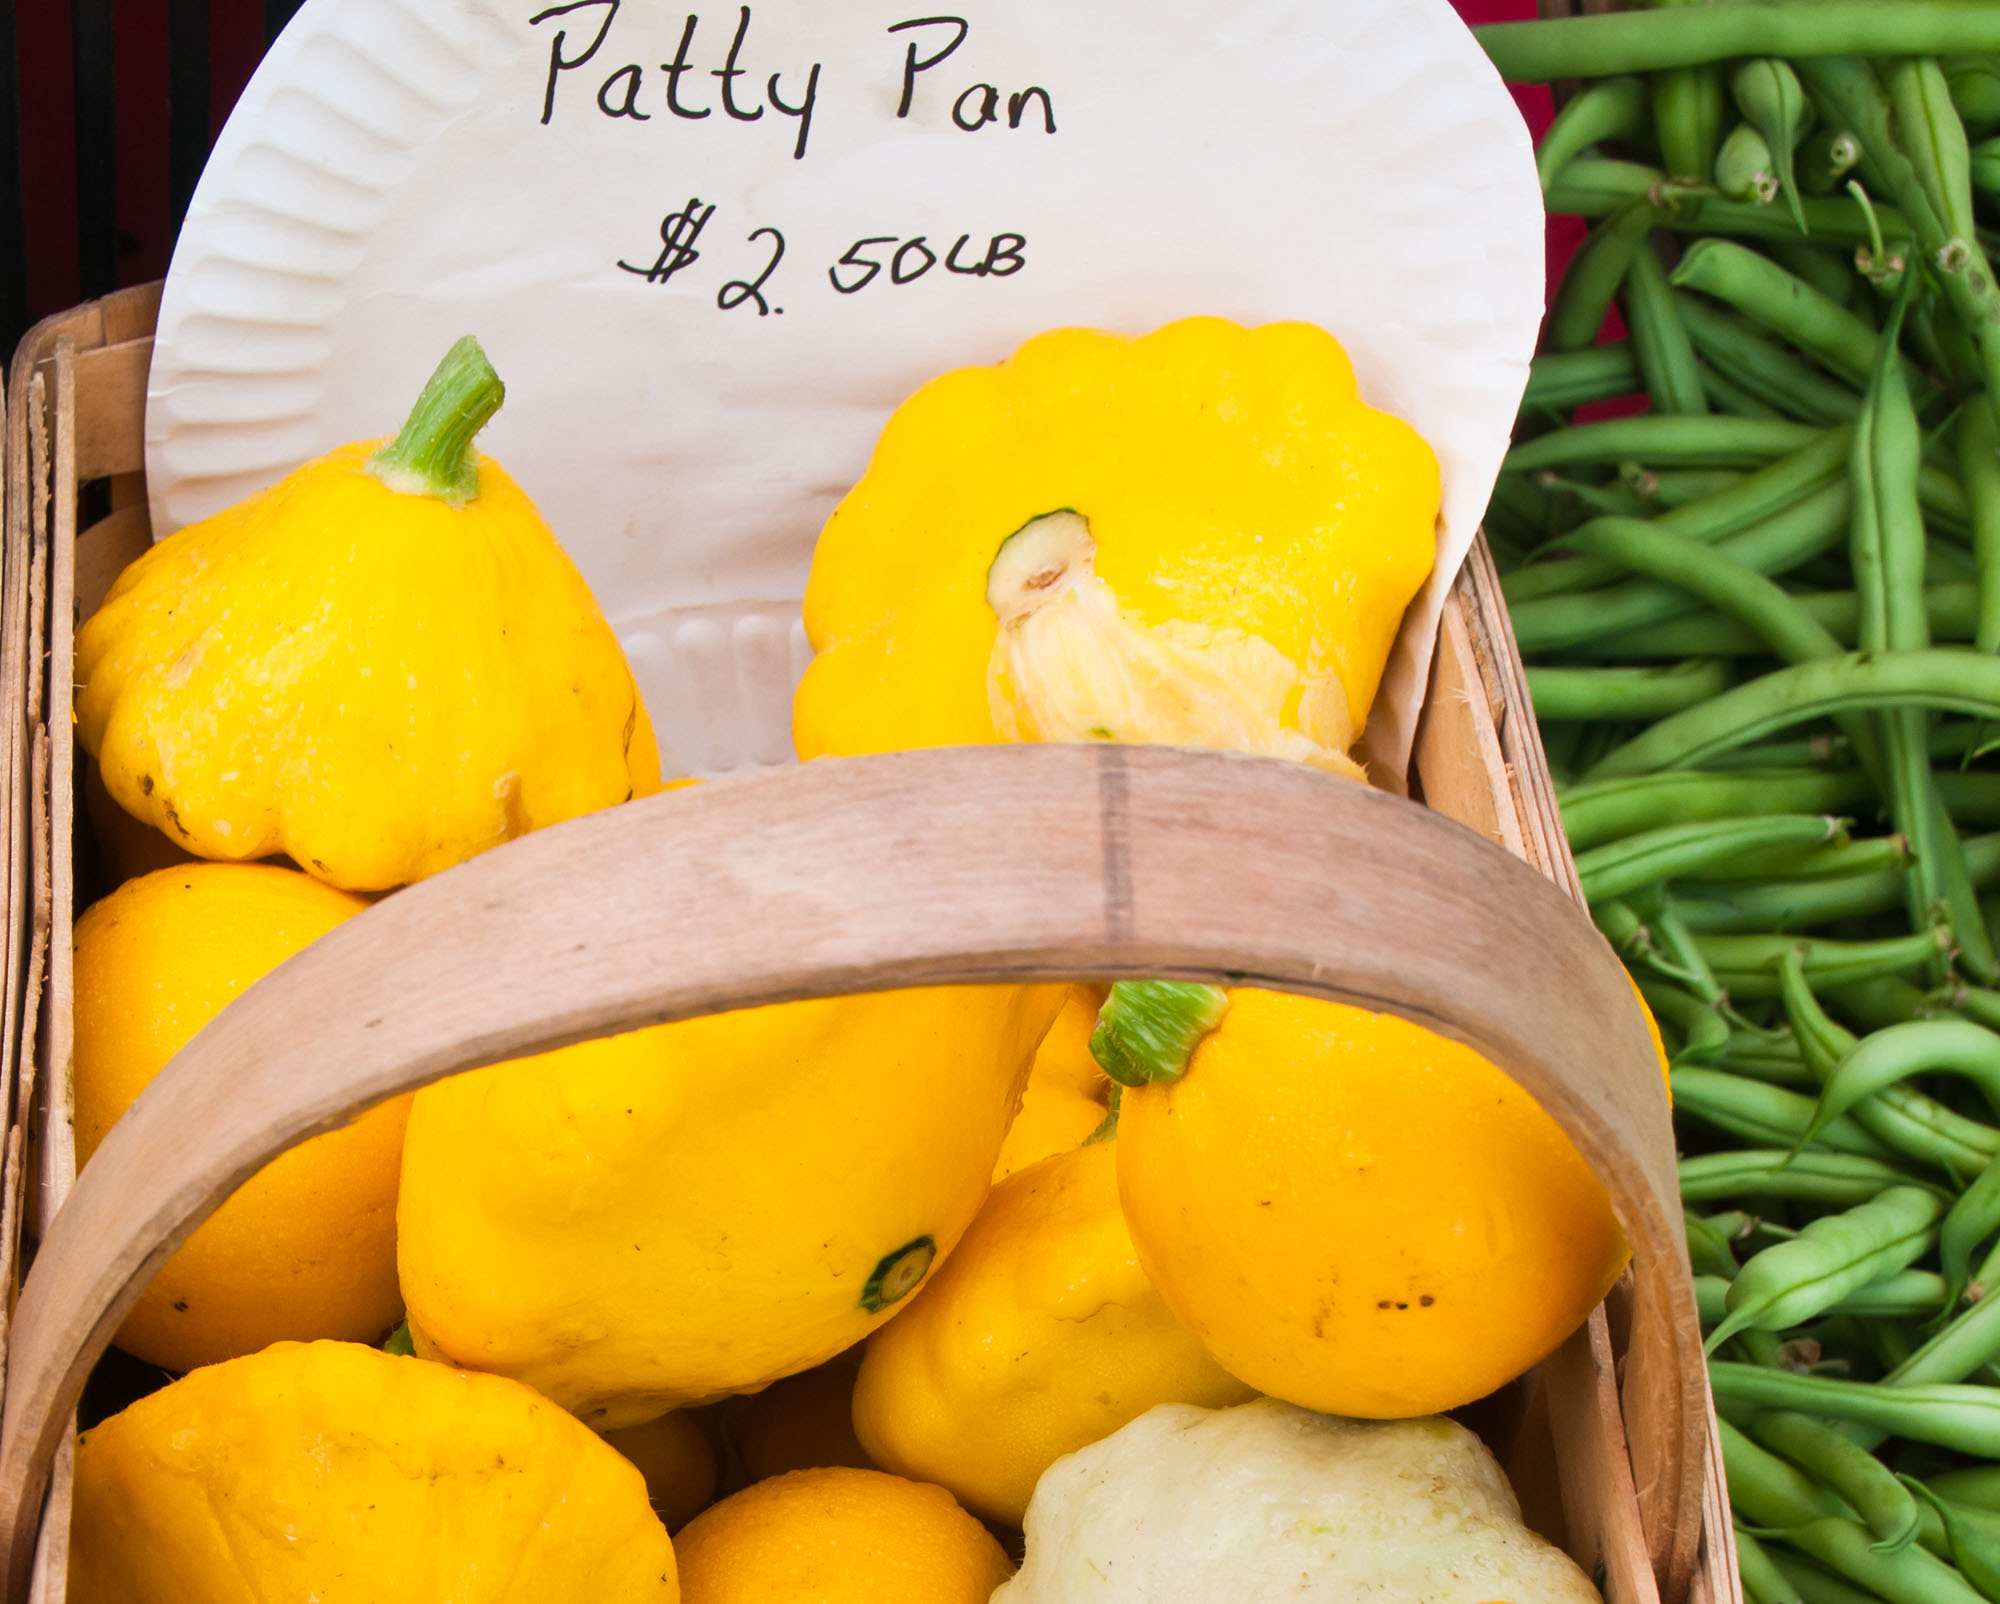 The Perfect Recipe For Stuffed Patty Pan Squash